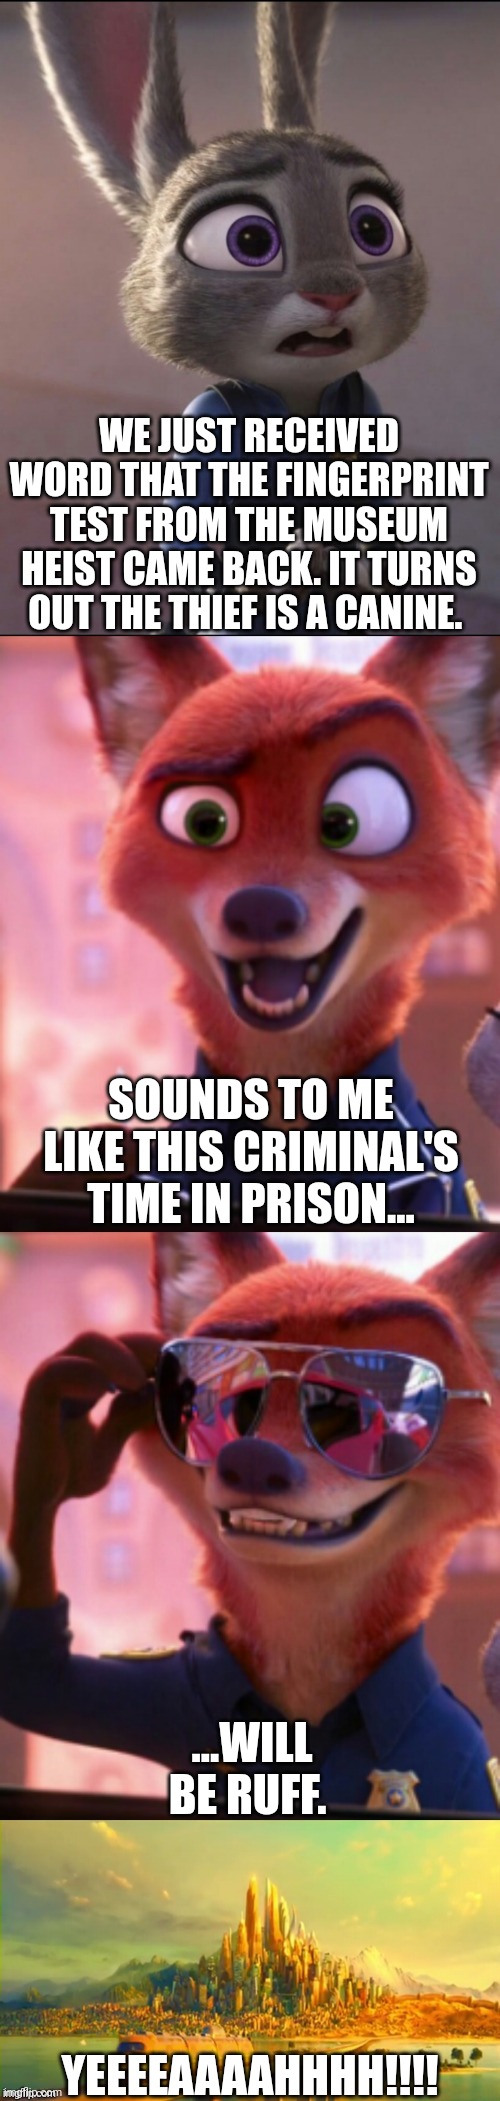 CSI: Zootopia 36 | WE JUST RECEIVED WORD THAT THE FINGERPRINT TEST FROM THE MUSEUM HEIST CAME BACK. IT TURNS OUT THE THIEF IS A CANINE. SOUNDS TO ME LIKE THIS CRIMINAL'S TIME IN PRISON... ...WILL BE RUFF. YEEEEAAAAHHHH!!!! | image tagged in csi zootopia,zootopia,judy hopps,nick wilde,parody,funny | made w/ Imgflip meme maker